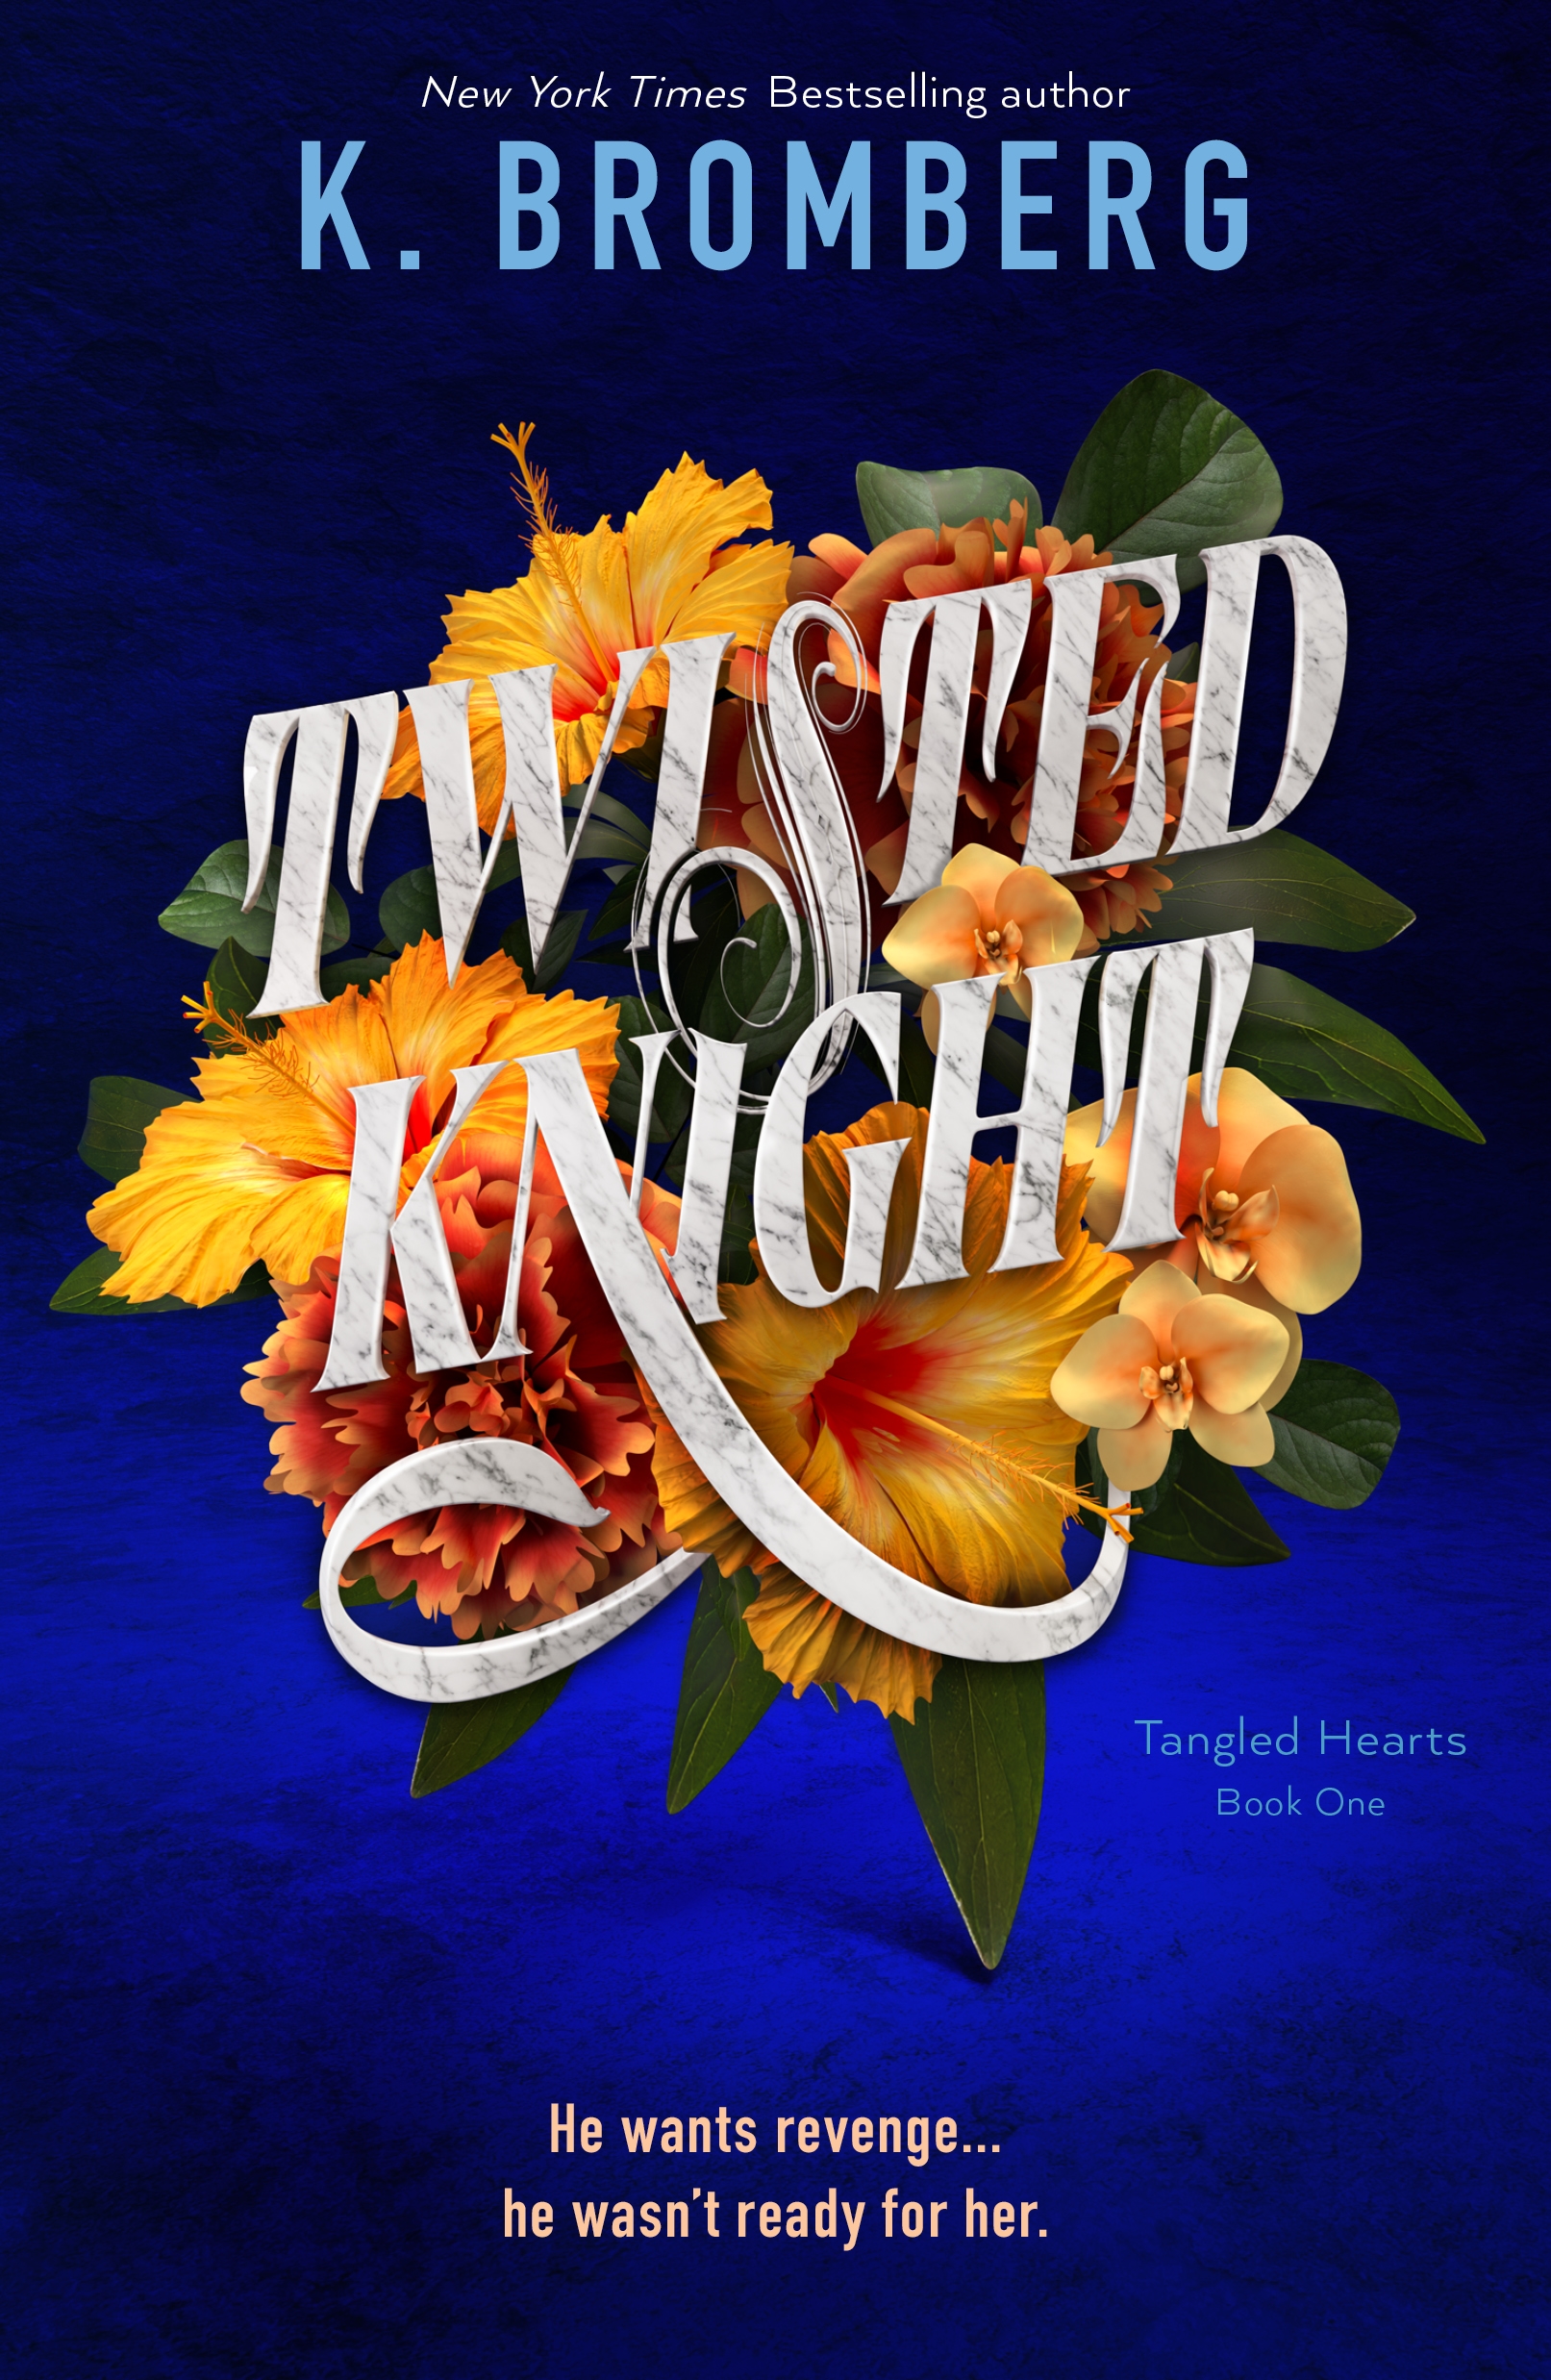 Twisted Knight by K. Bromberg